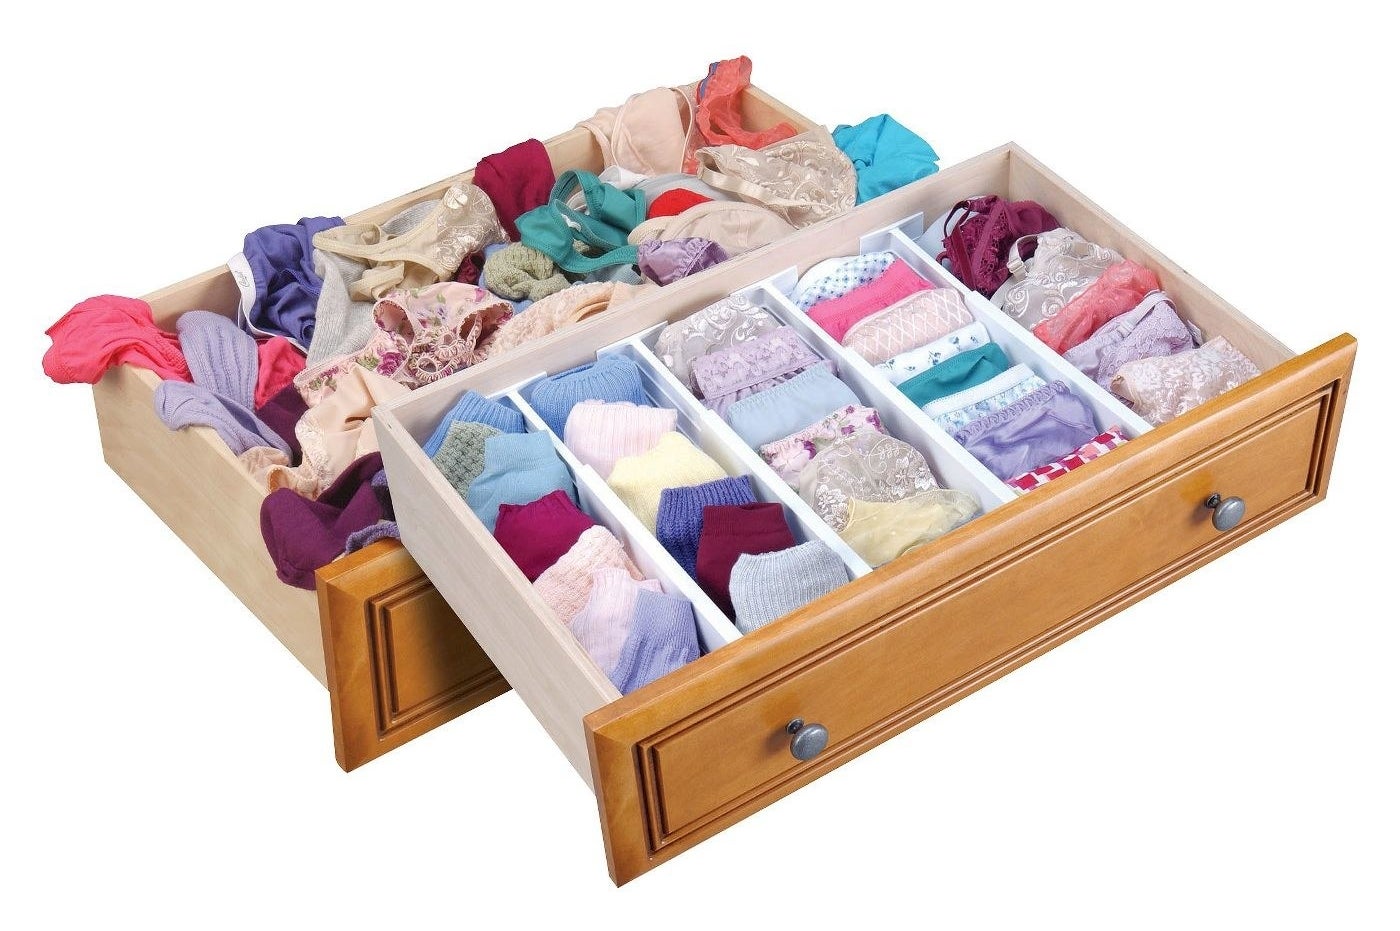 A drawer organizer with colorful clothing inside of it